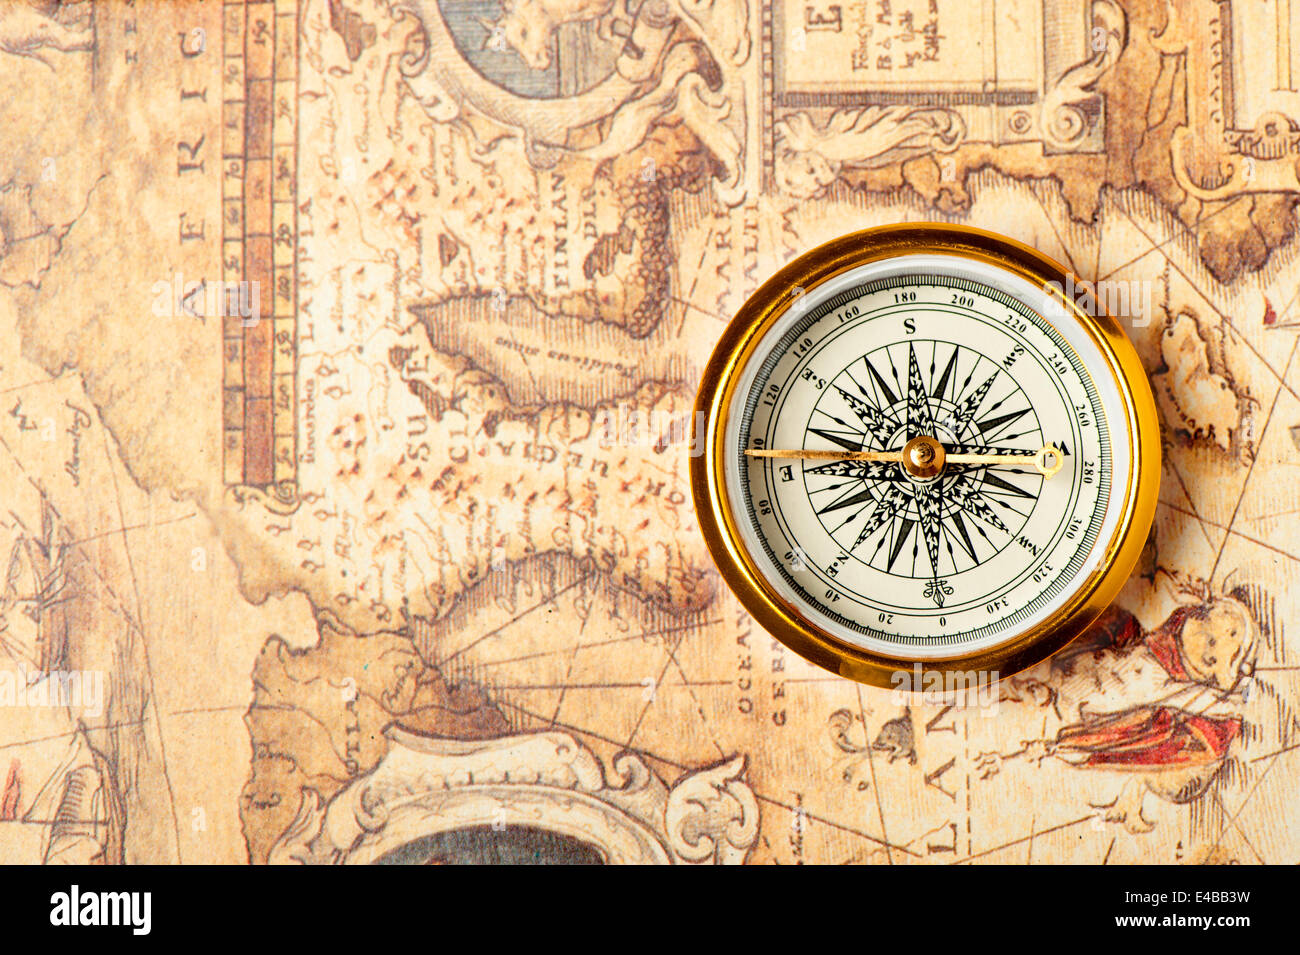 Old compass on ancient map Stock Photo